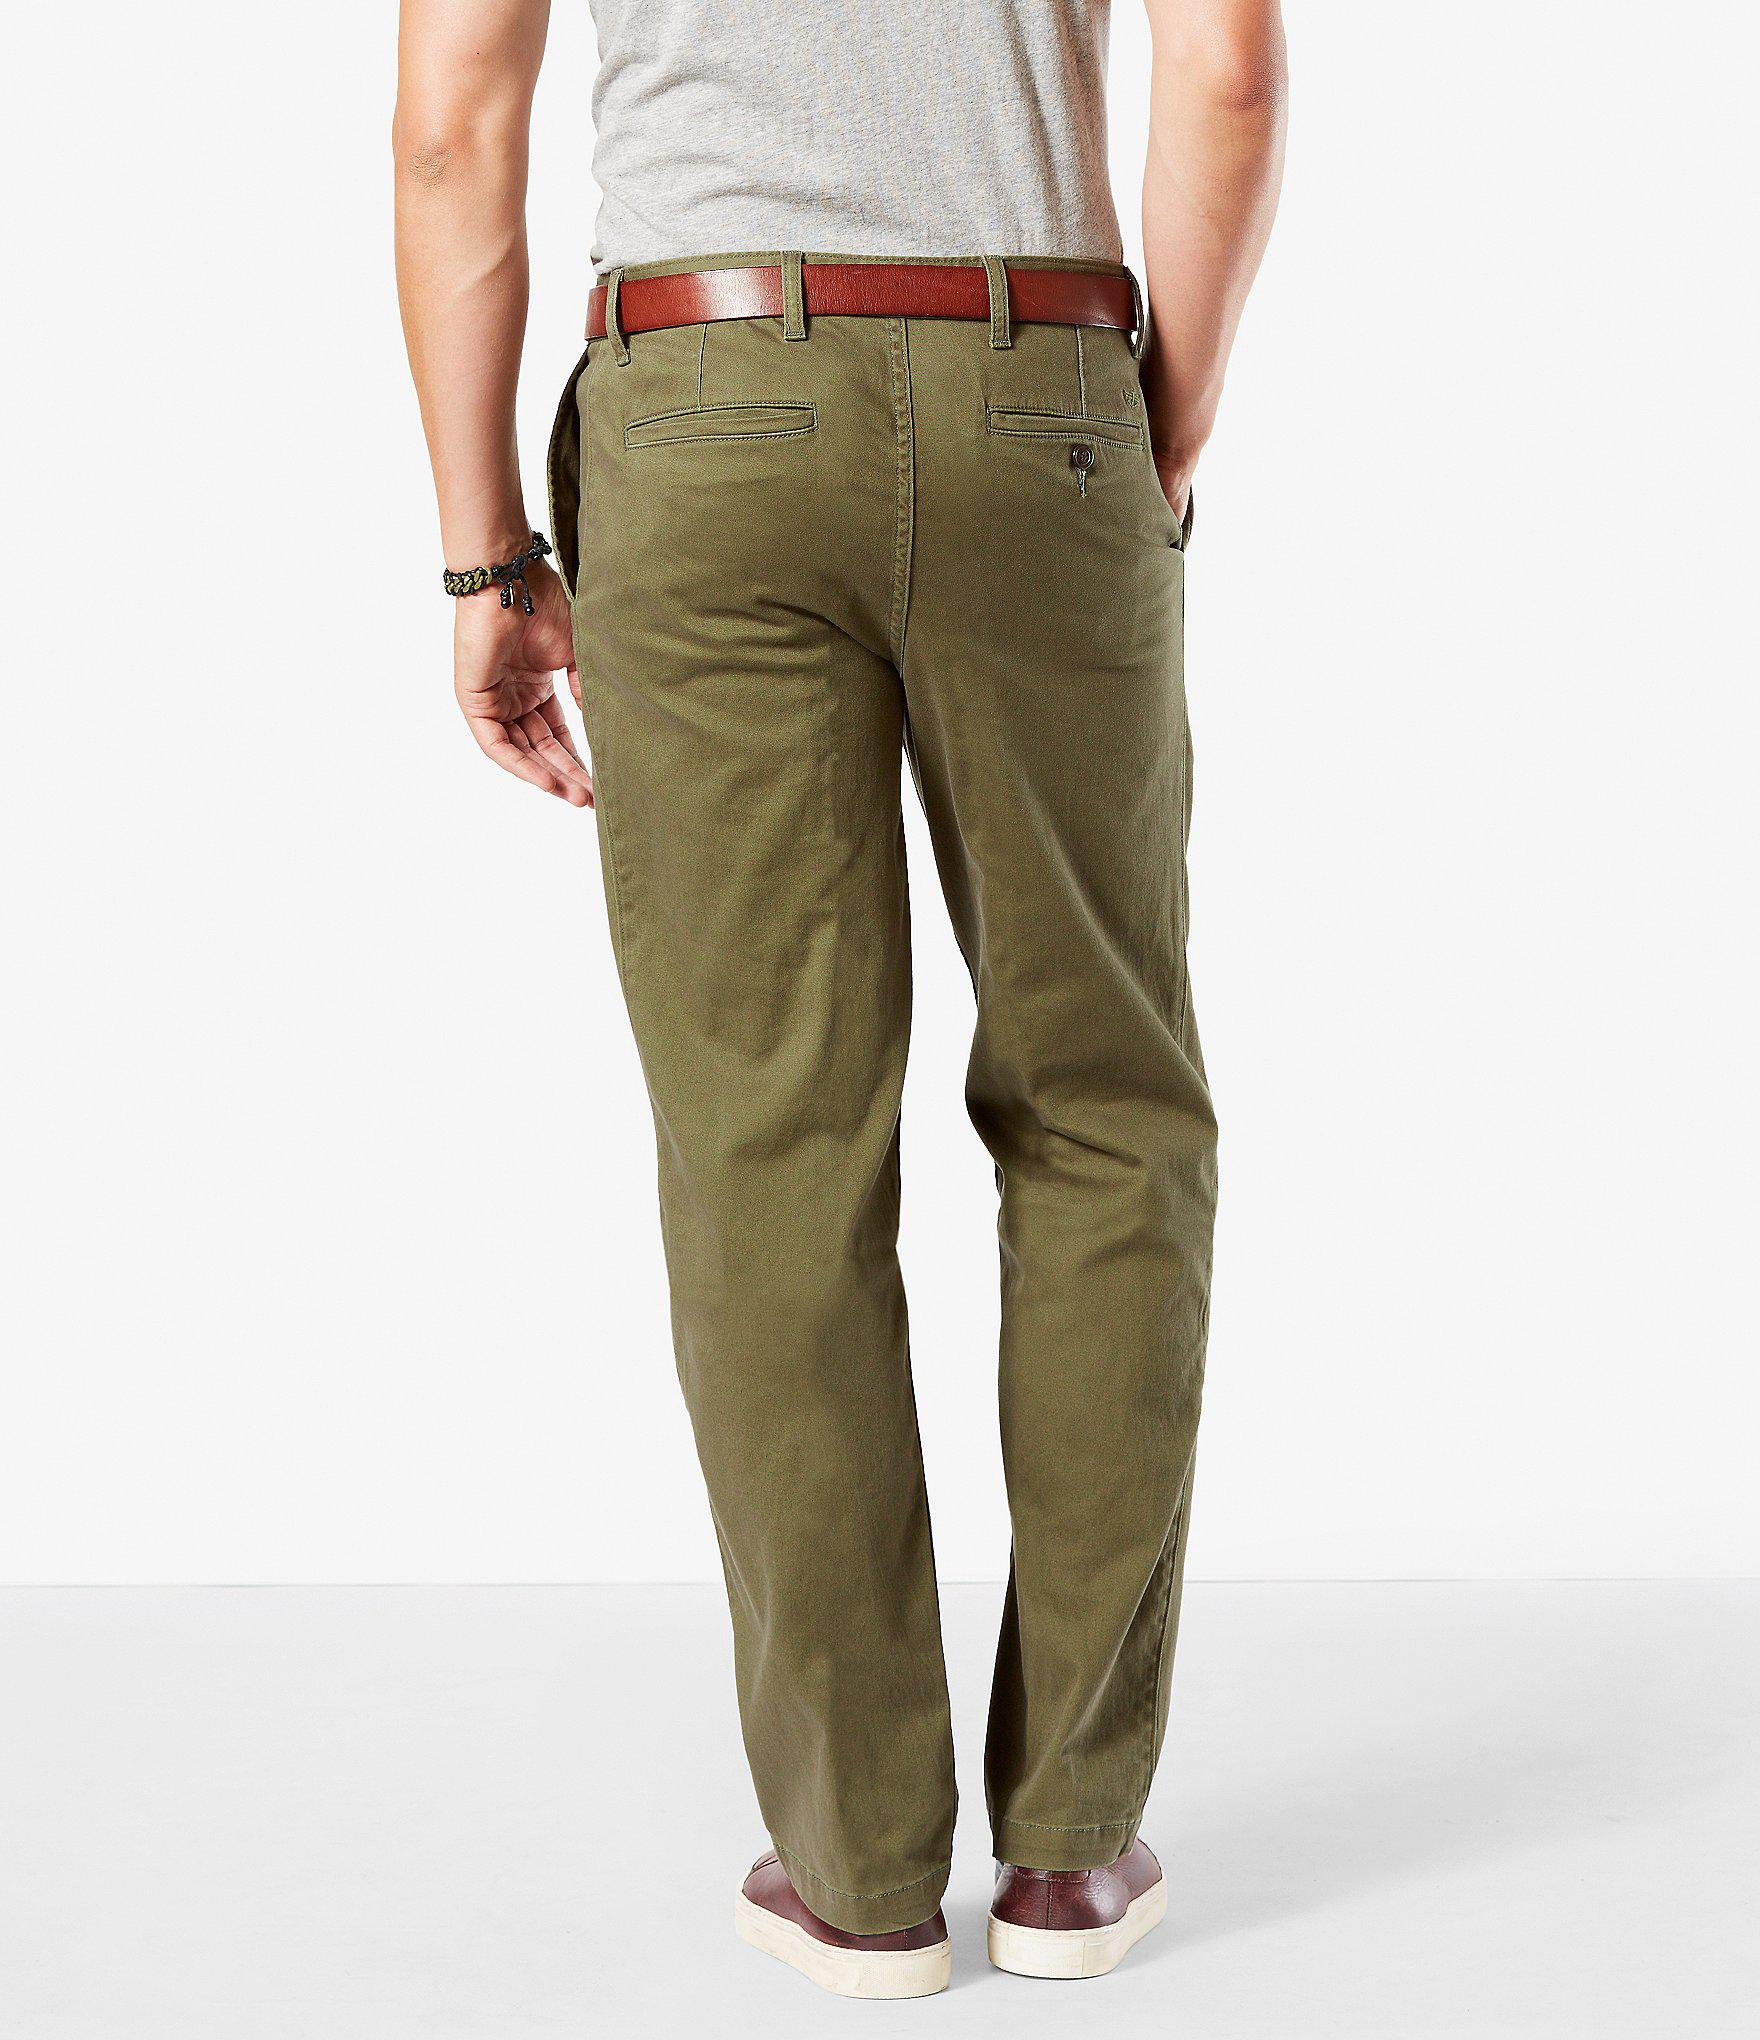 Lyst - Dockers Washed Khaki Flat Front Classic-fit Pants in Green for Men